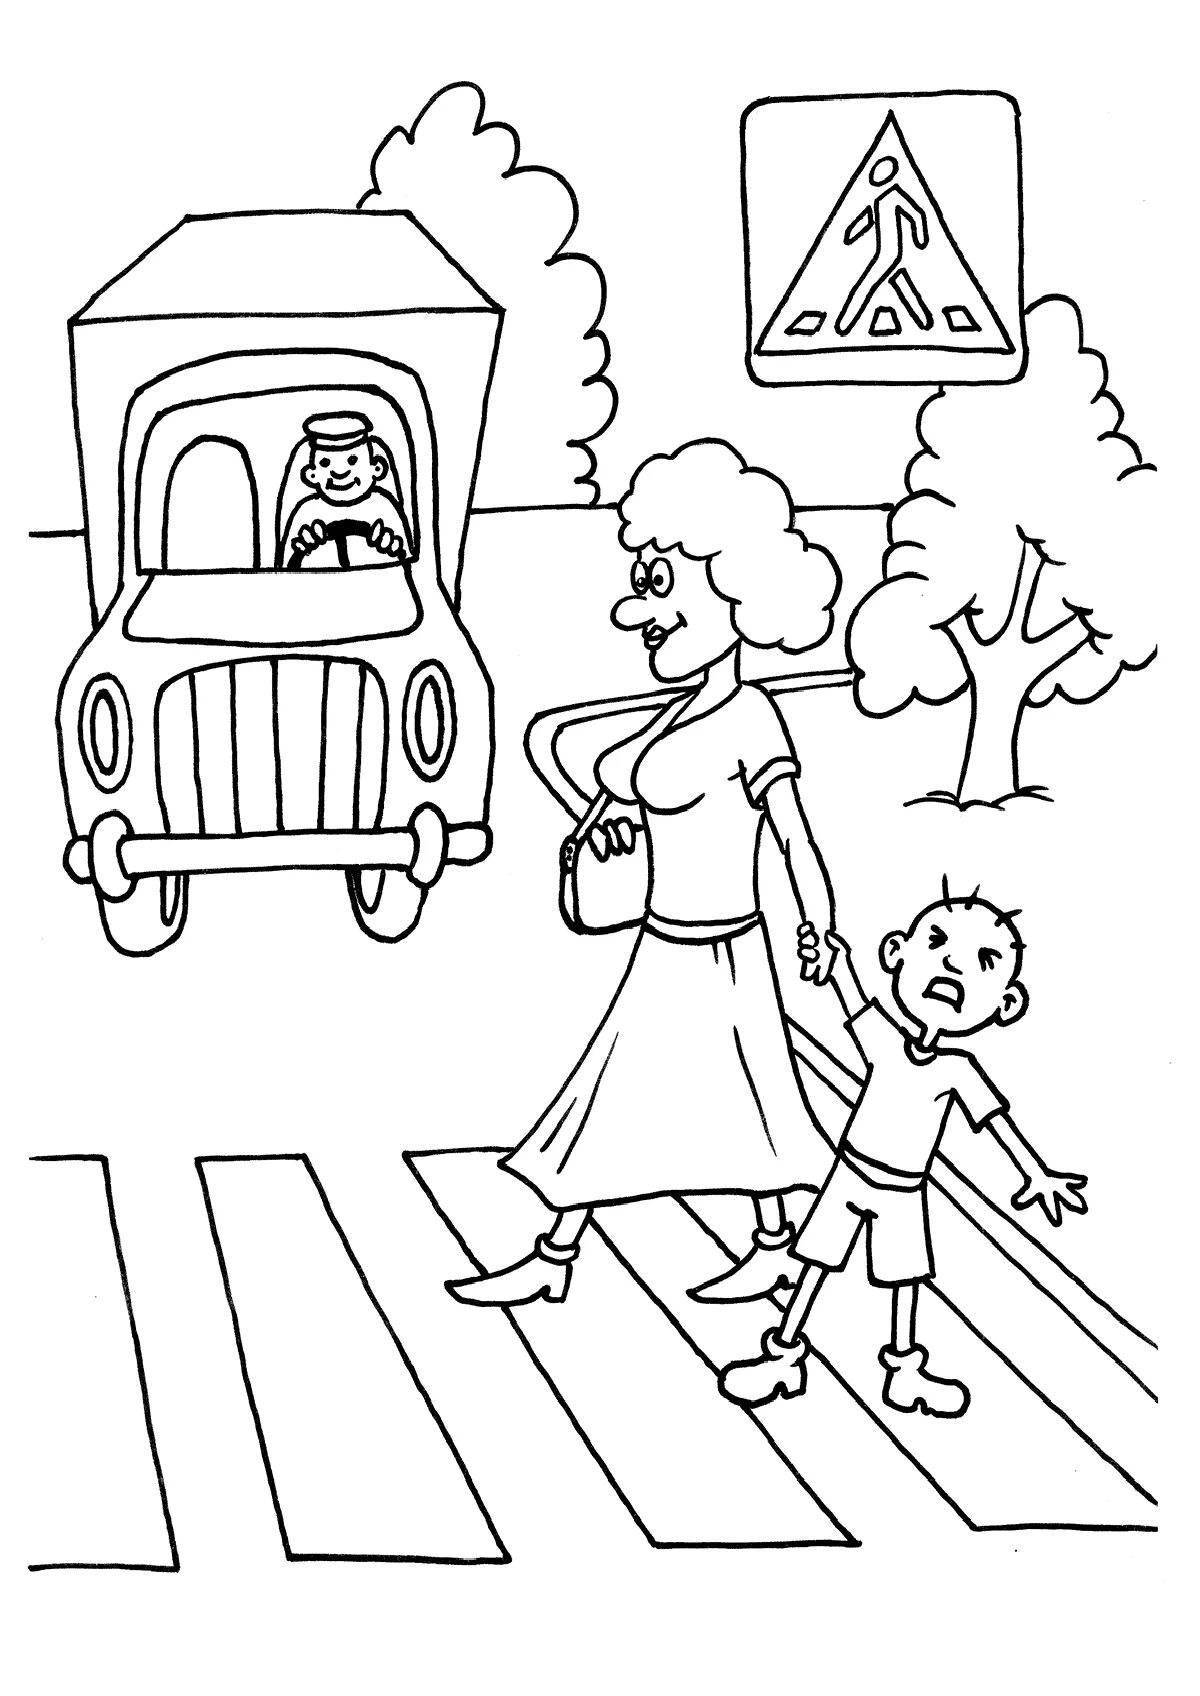 Pedestrian crossing for children 6 7 years old #13